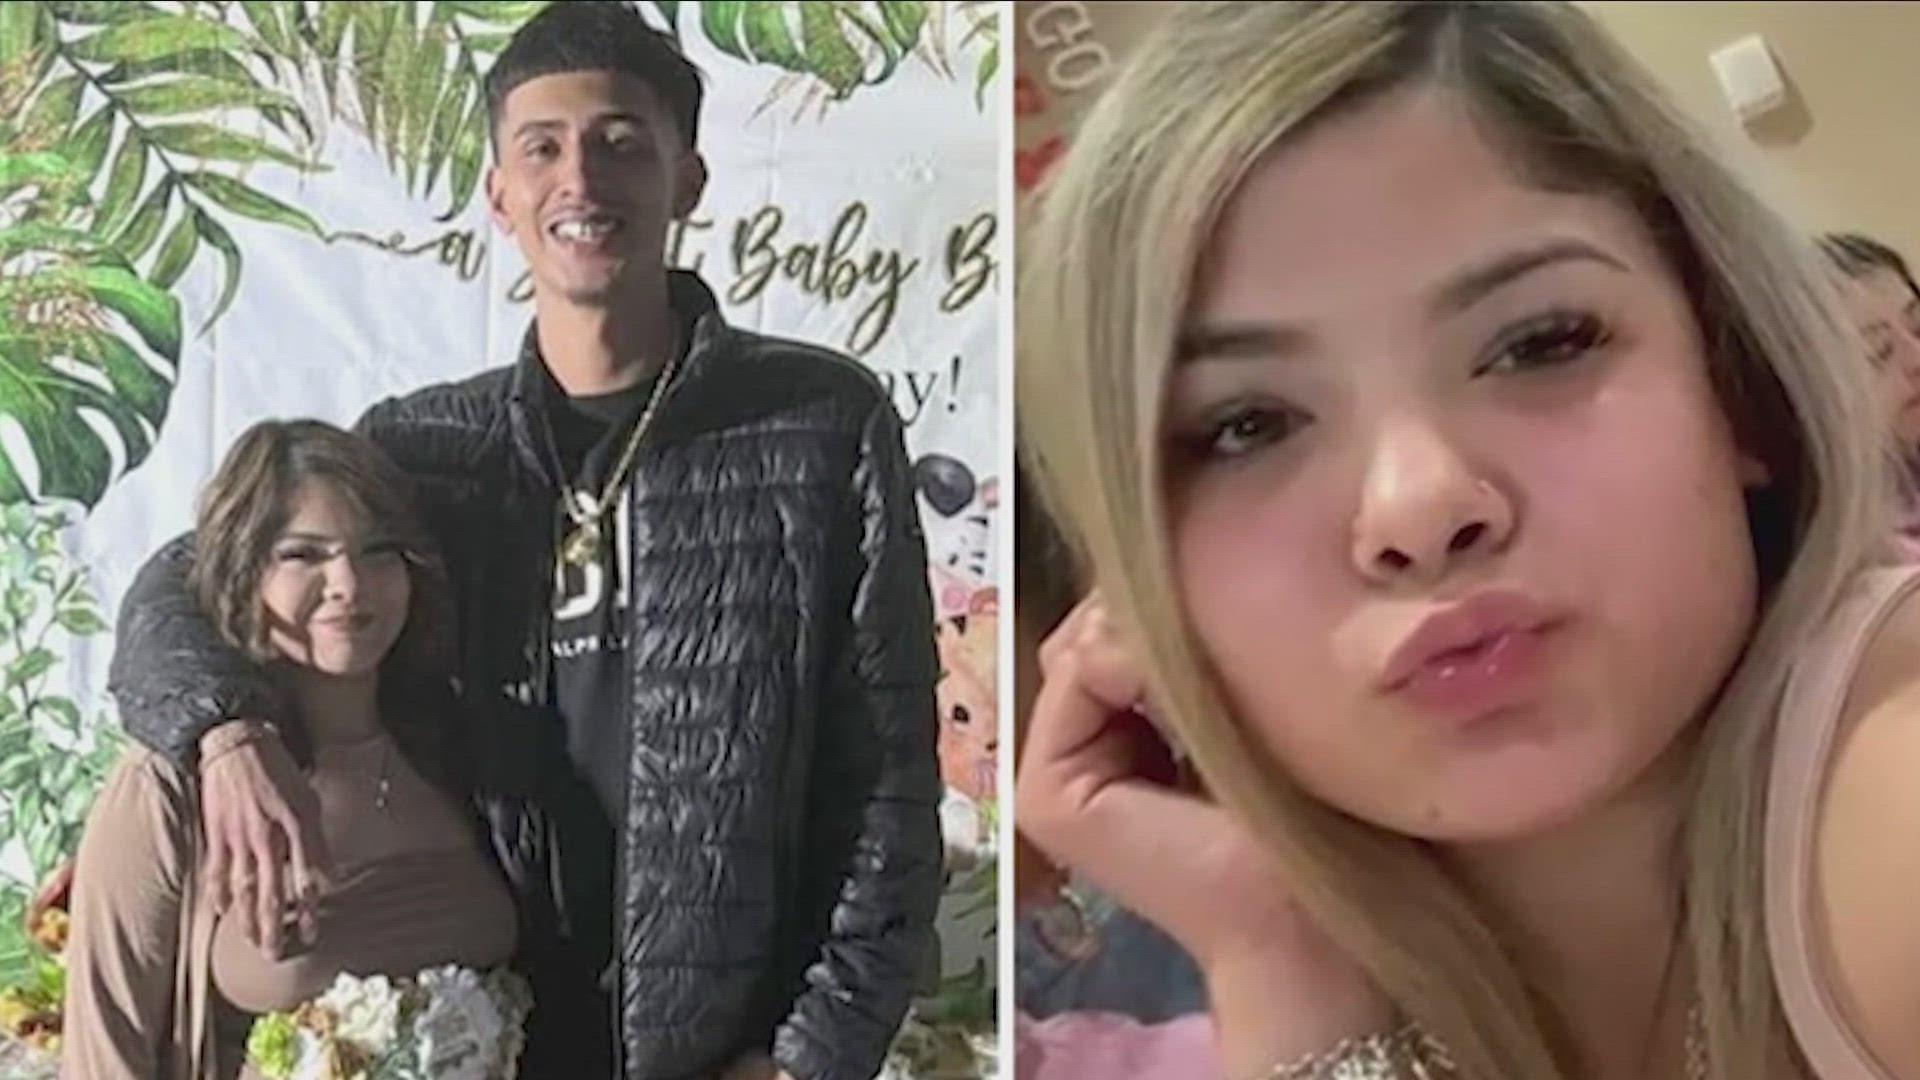 Two bodies were found inside a vehicle in San Antonio on Tuesday (12/26). Police believe the victims are Savanah Soto and Matthew Guerra.